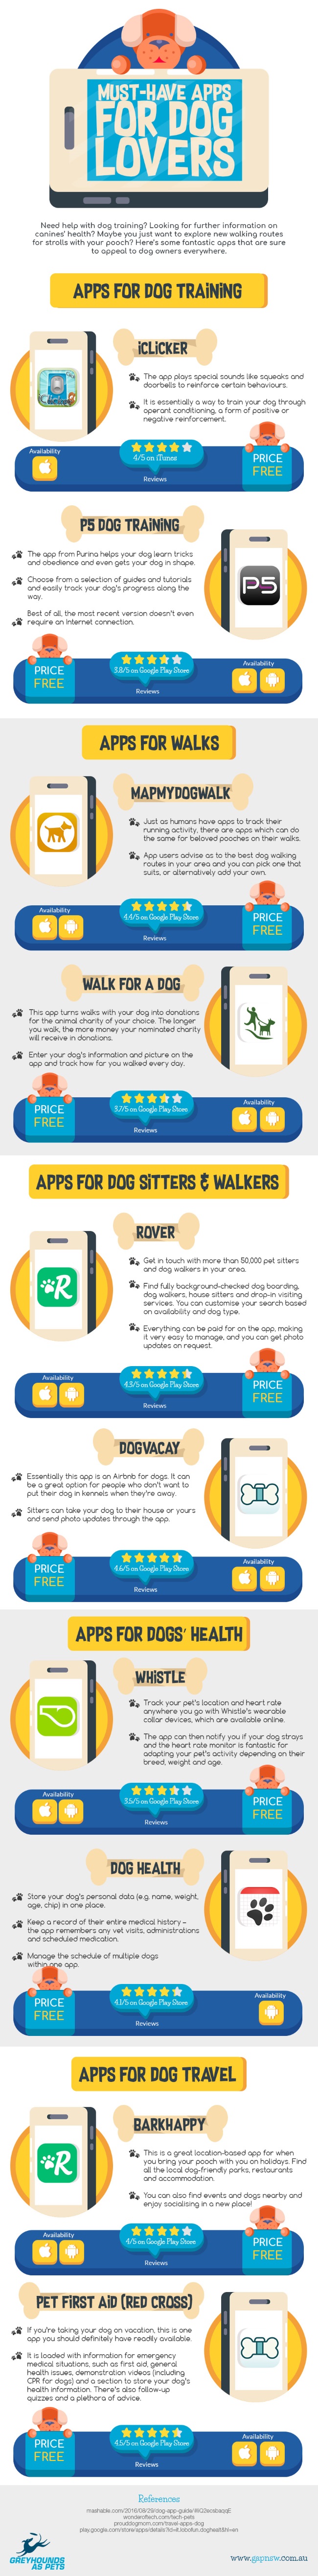 Apps for dog lovers